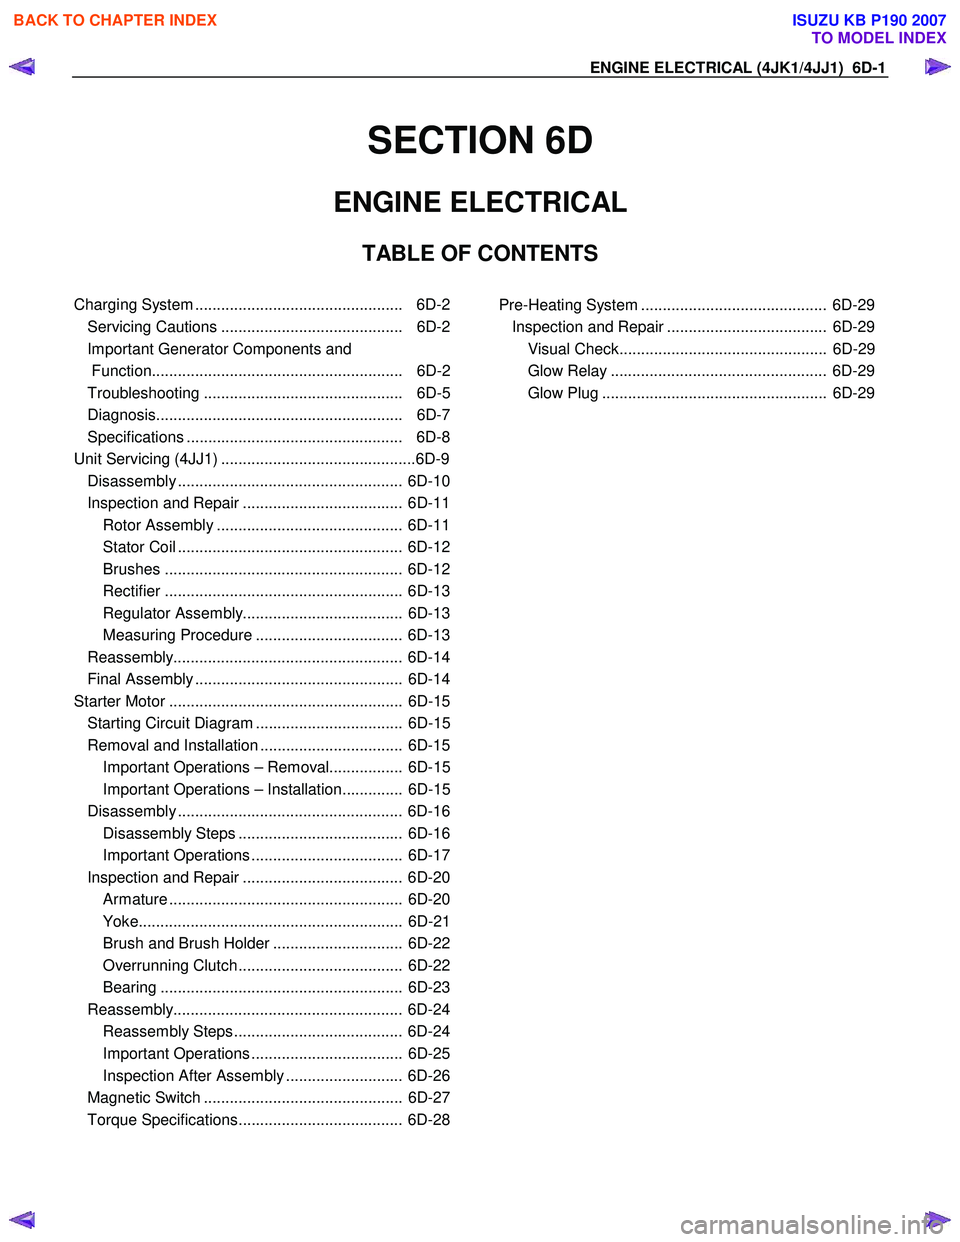 ISUZU KB P190 2007  Workshop User Guide ENGINE ELECTRICAL (4JK1/4JJ1)  6D-1 
SECTION 6D 
ENGINE ELECTRICAL  
TABLE OF CONTENTS  
 
Charging System ................................................  6D-2
Servicing Cautions ...................